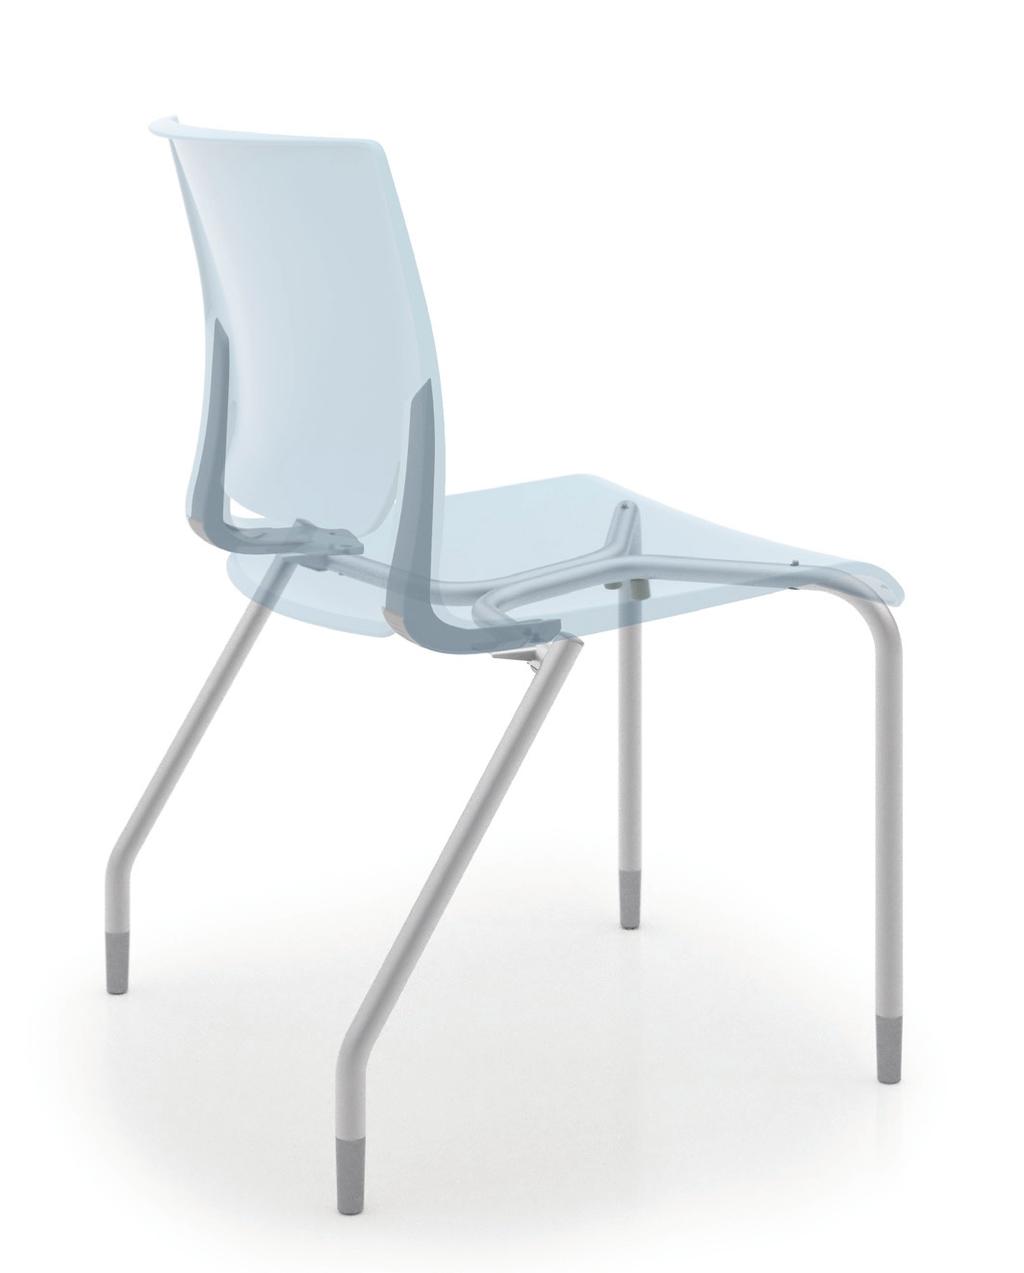 A unique insert enables the chair to flex based on the amount of weight pressed against it